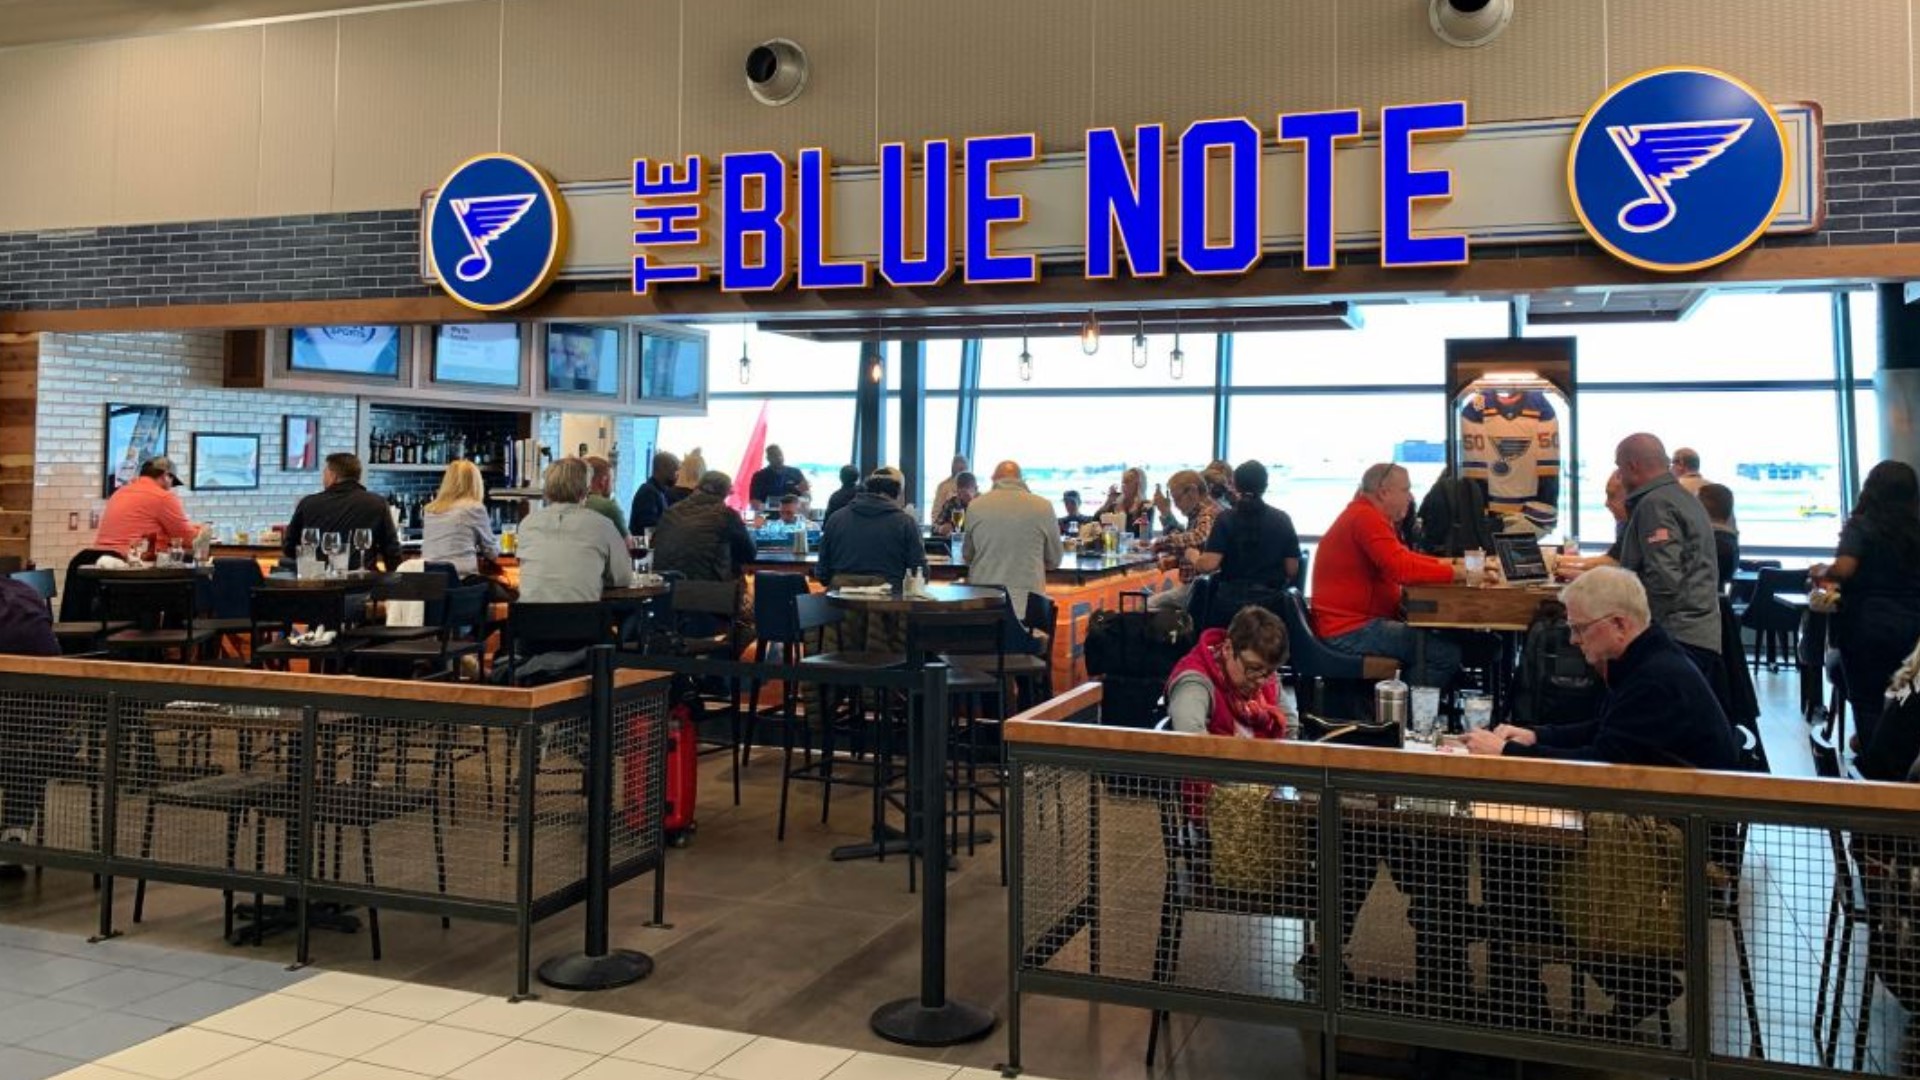 The St. Louis Blues partnered with global restaurateur HMSHost to open The Blue Note